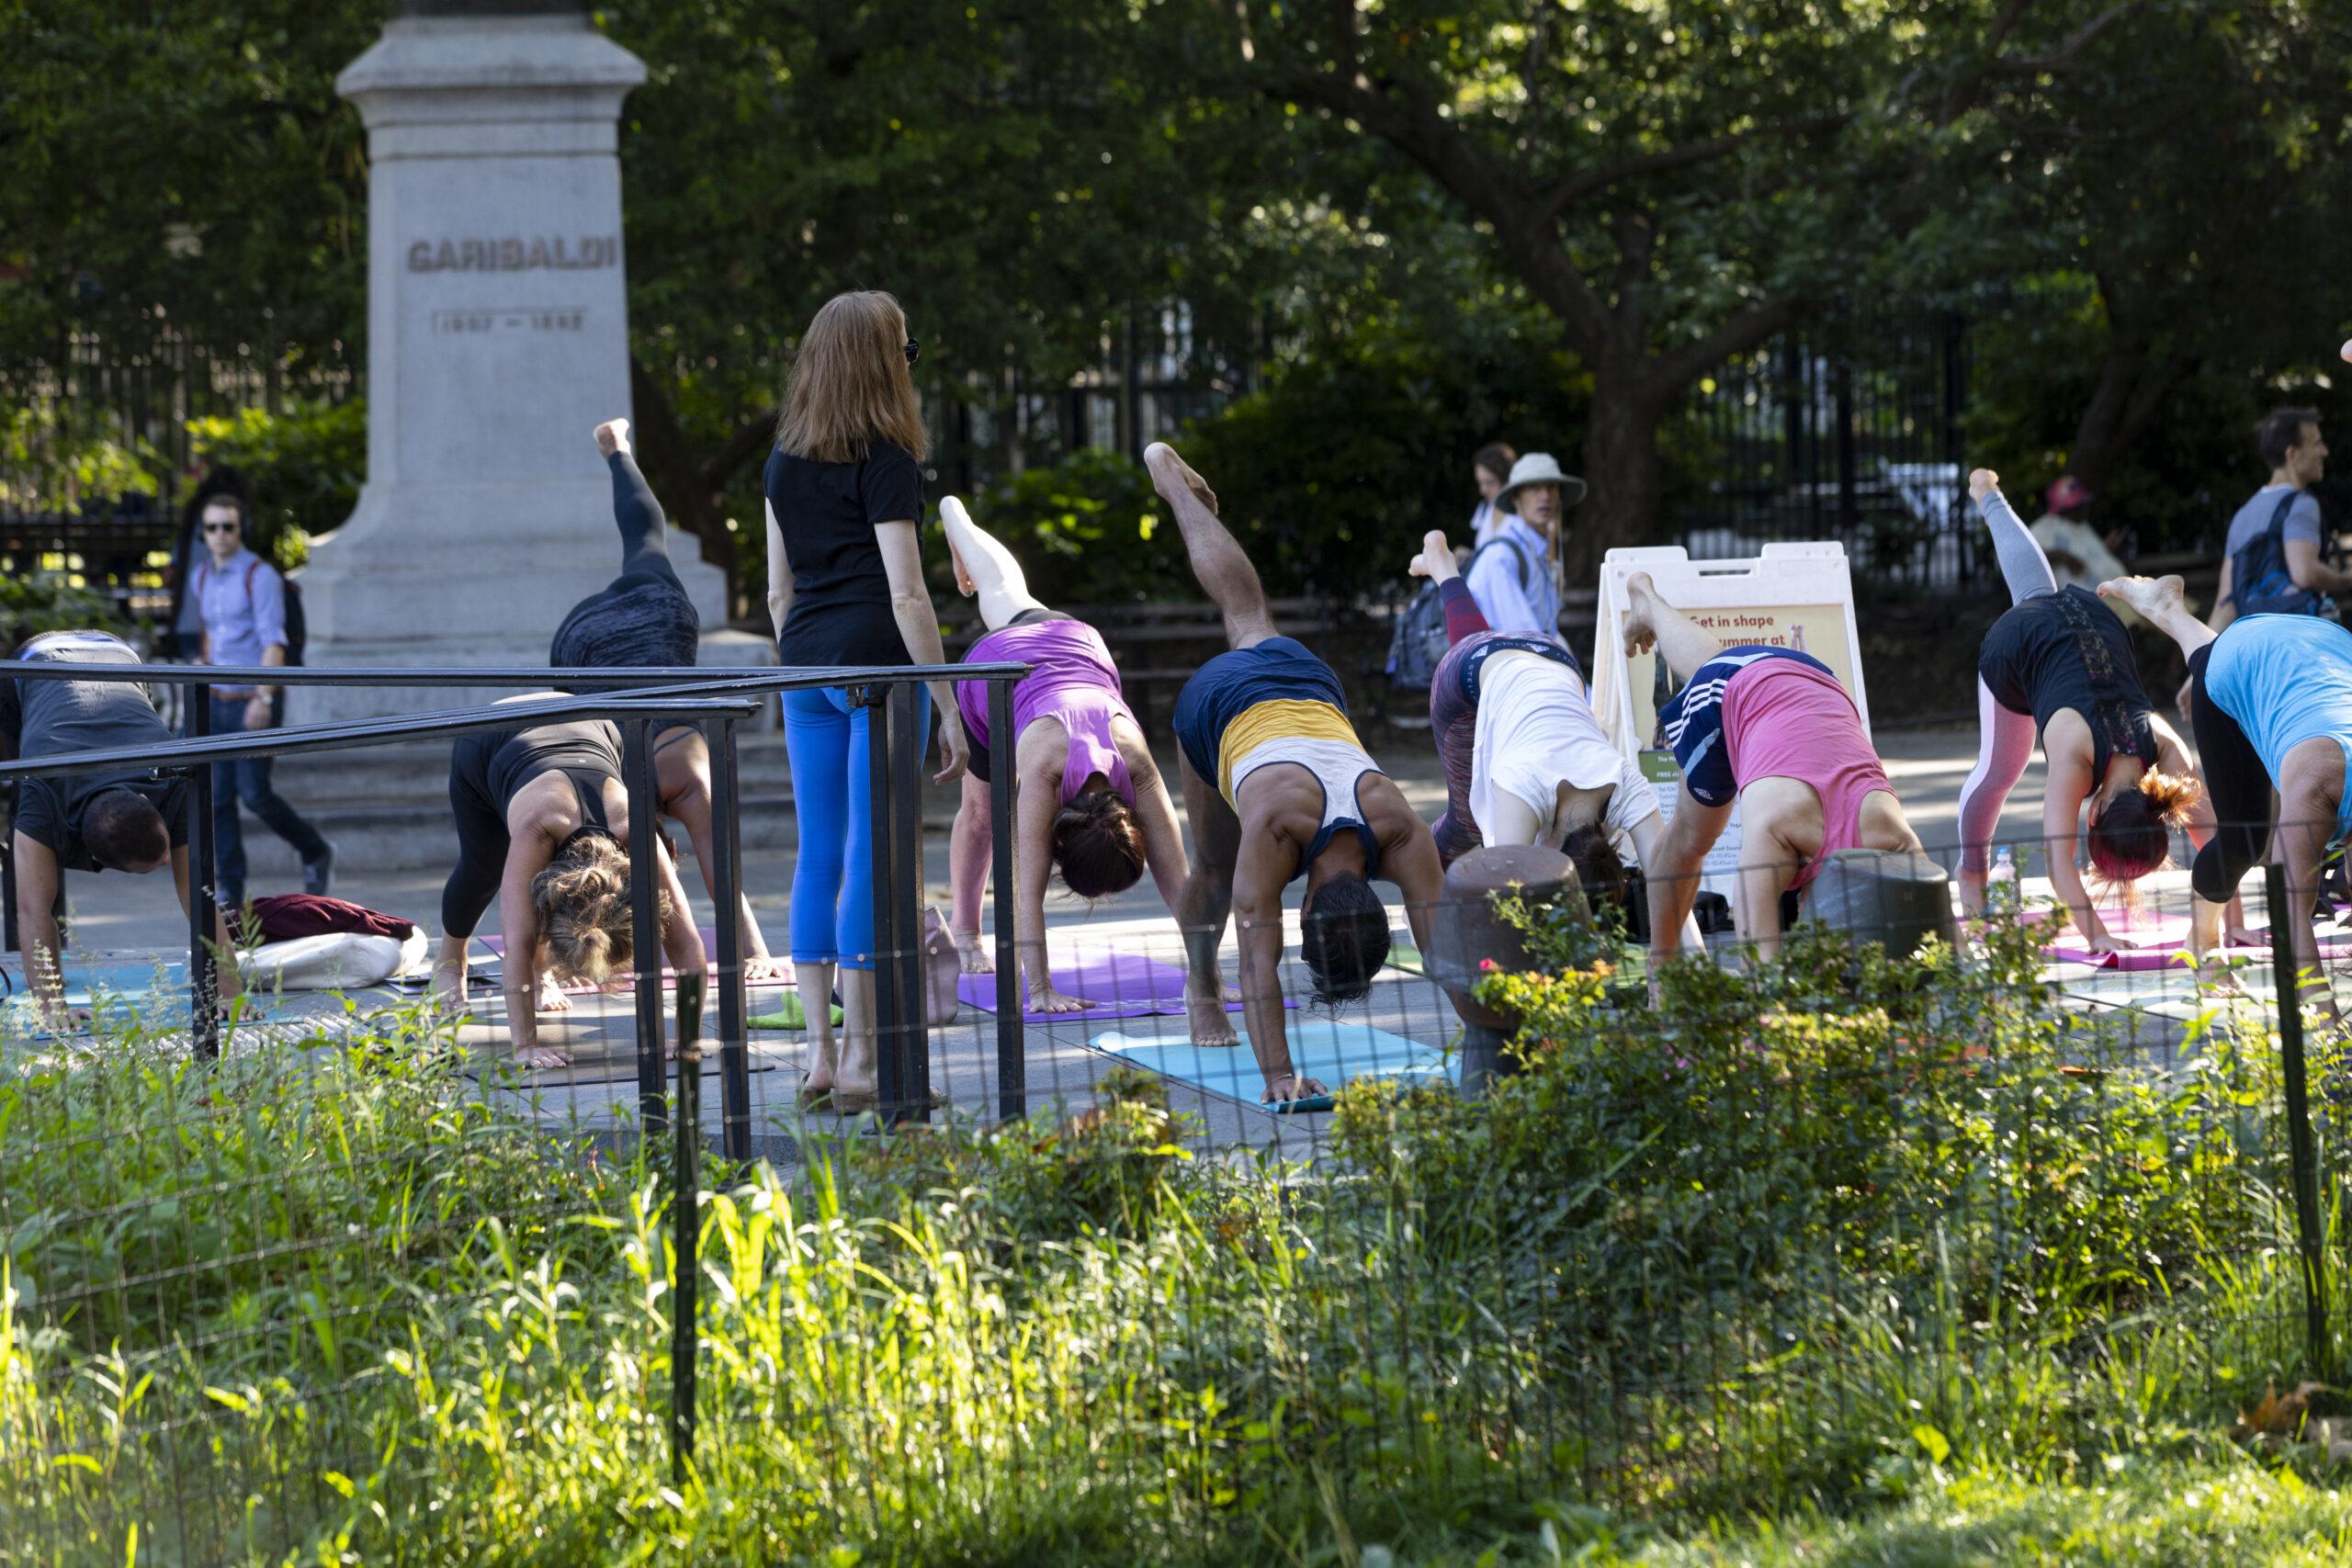 A group of people practicing yoga outdoors in a park. Each person is in three-legged downward dog pose.